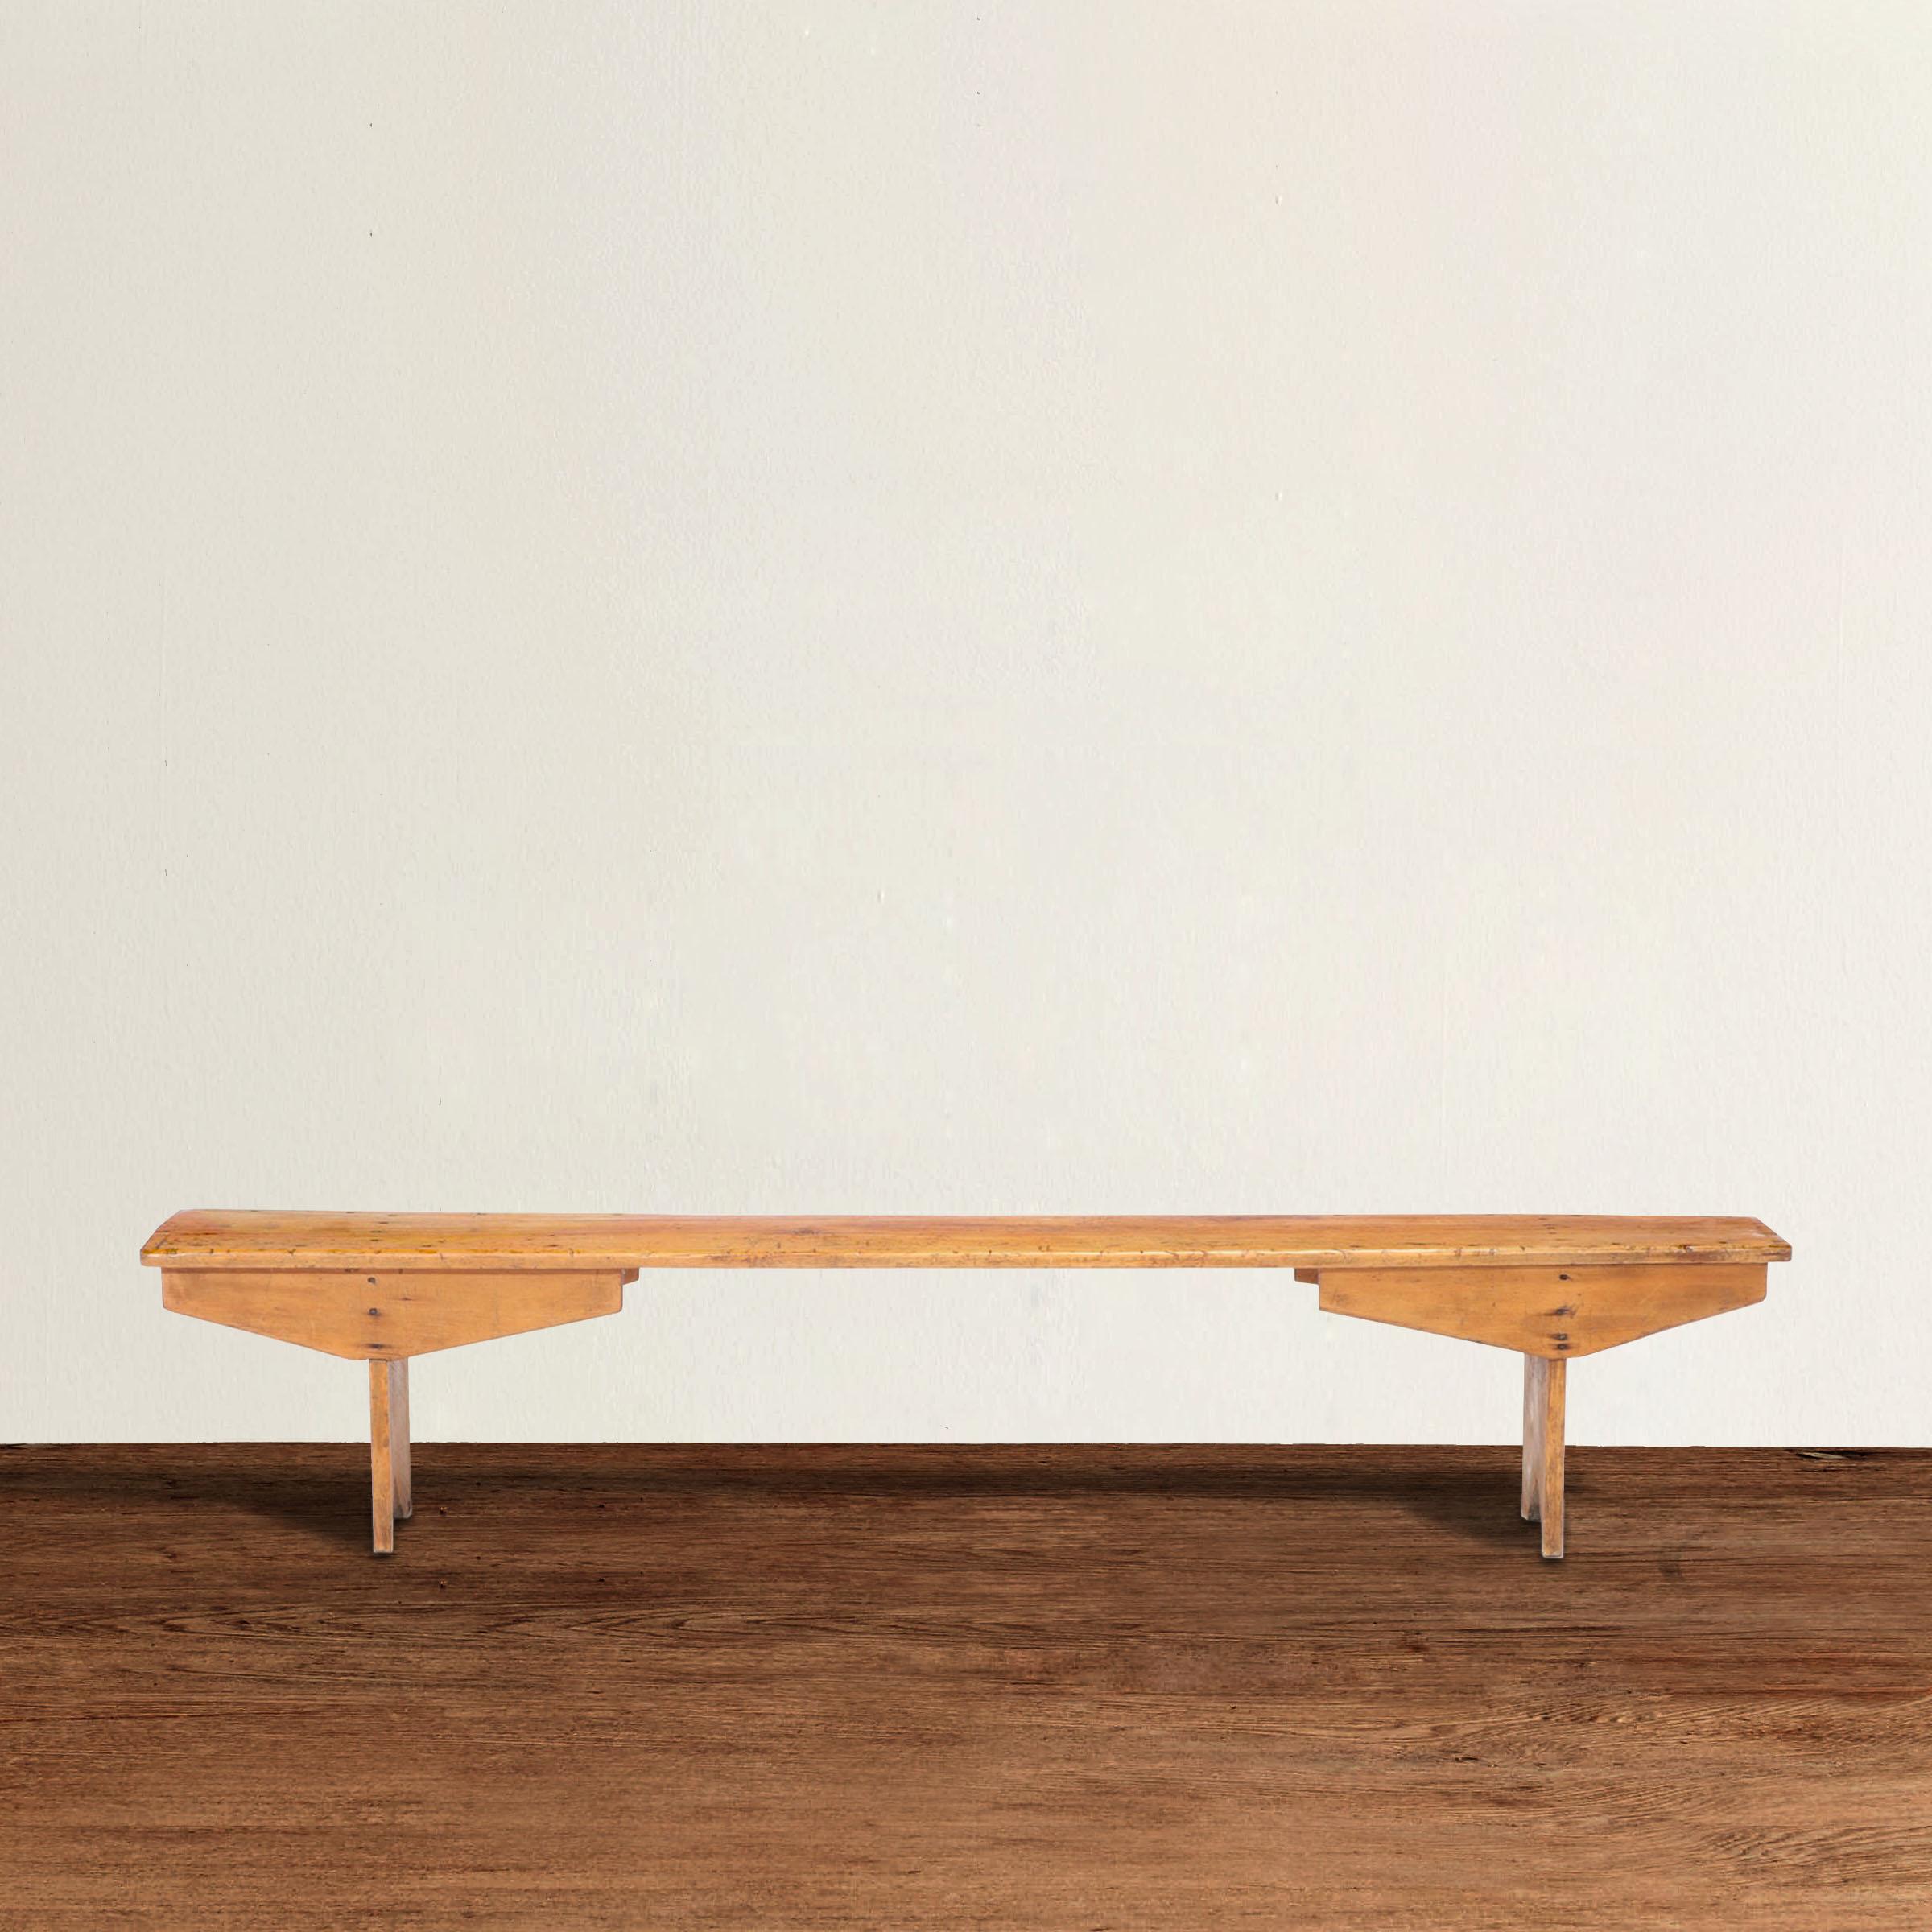 A chic and modern-in-spirit 19th century American pine single plank-top bench with simple legs and exaggerated wide spandrels.